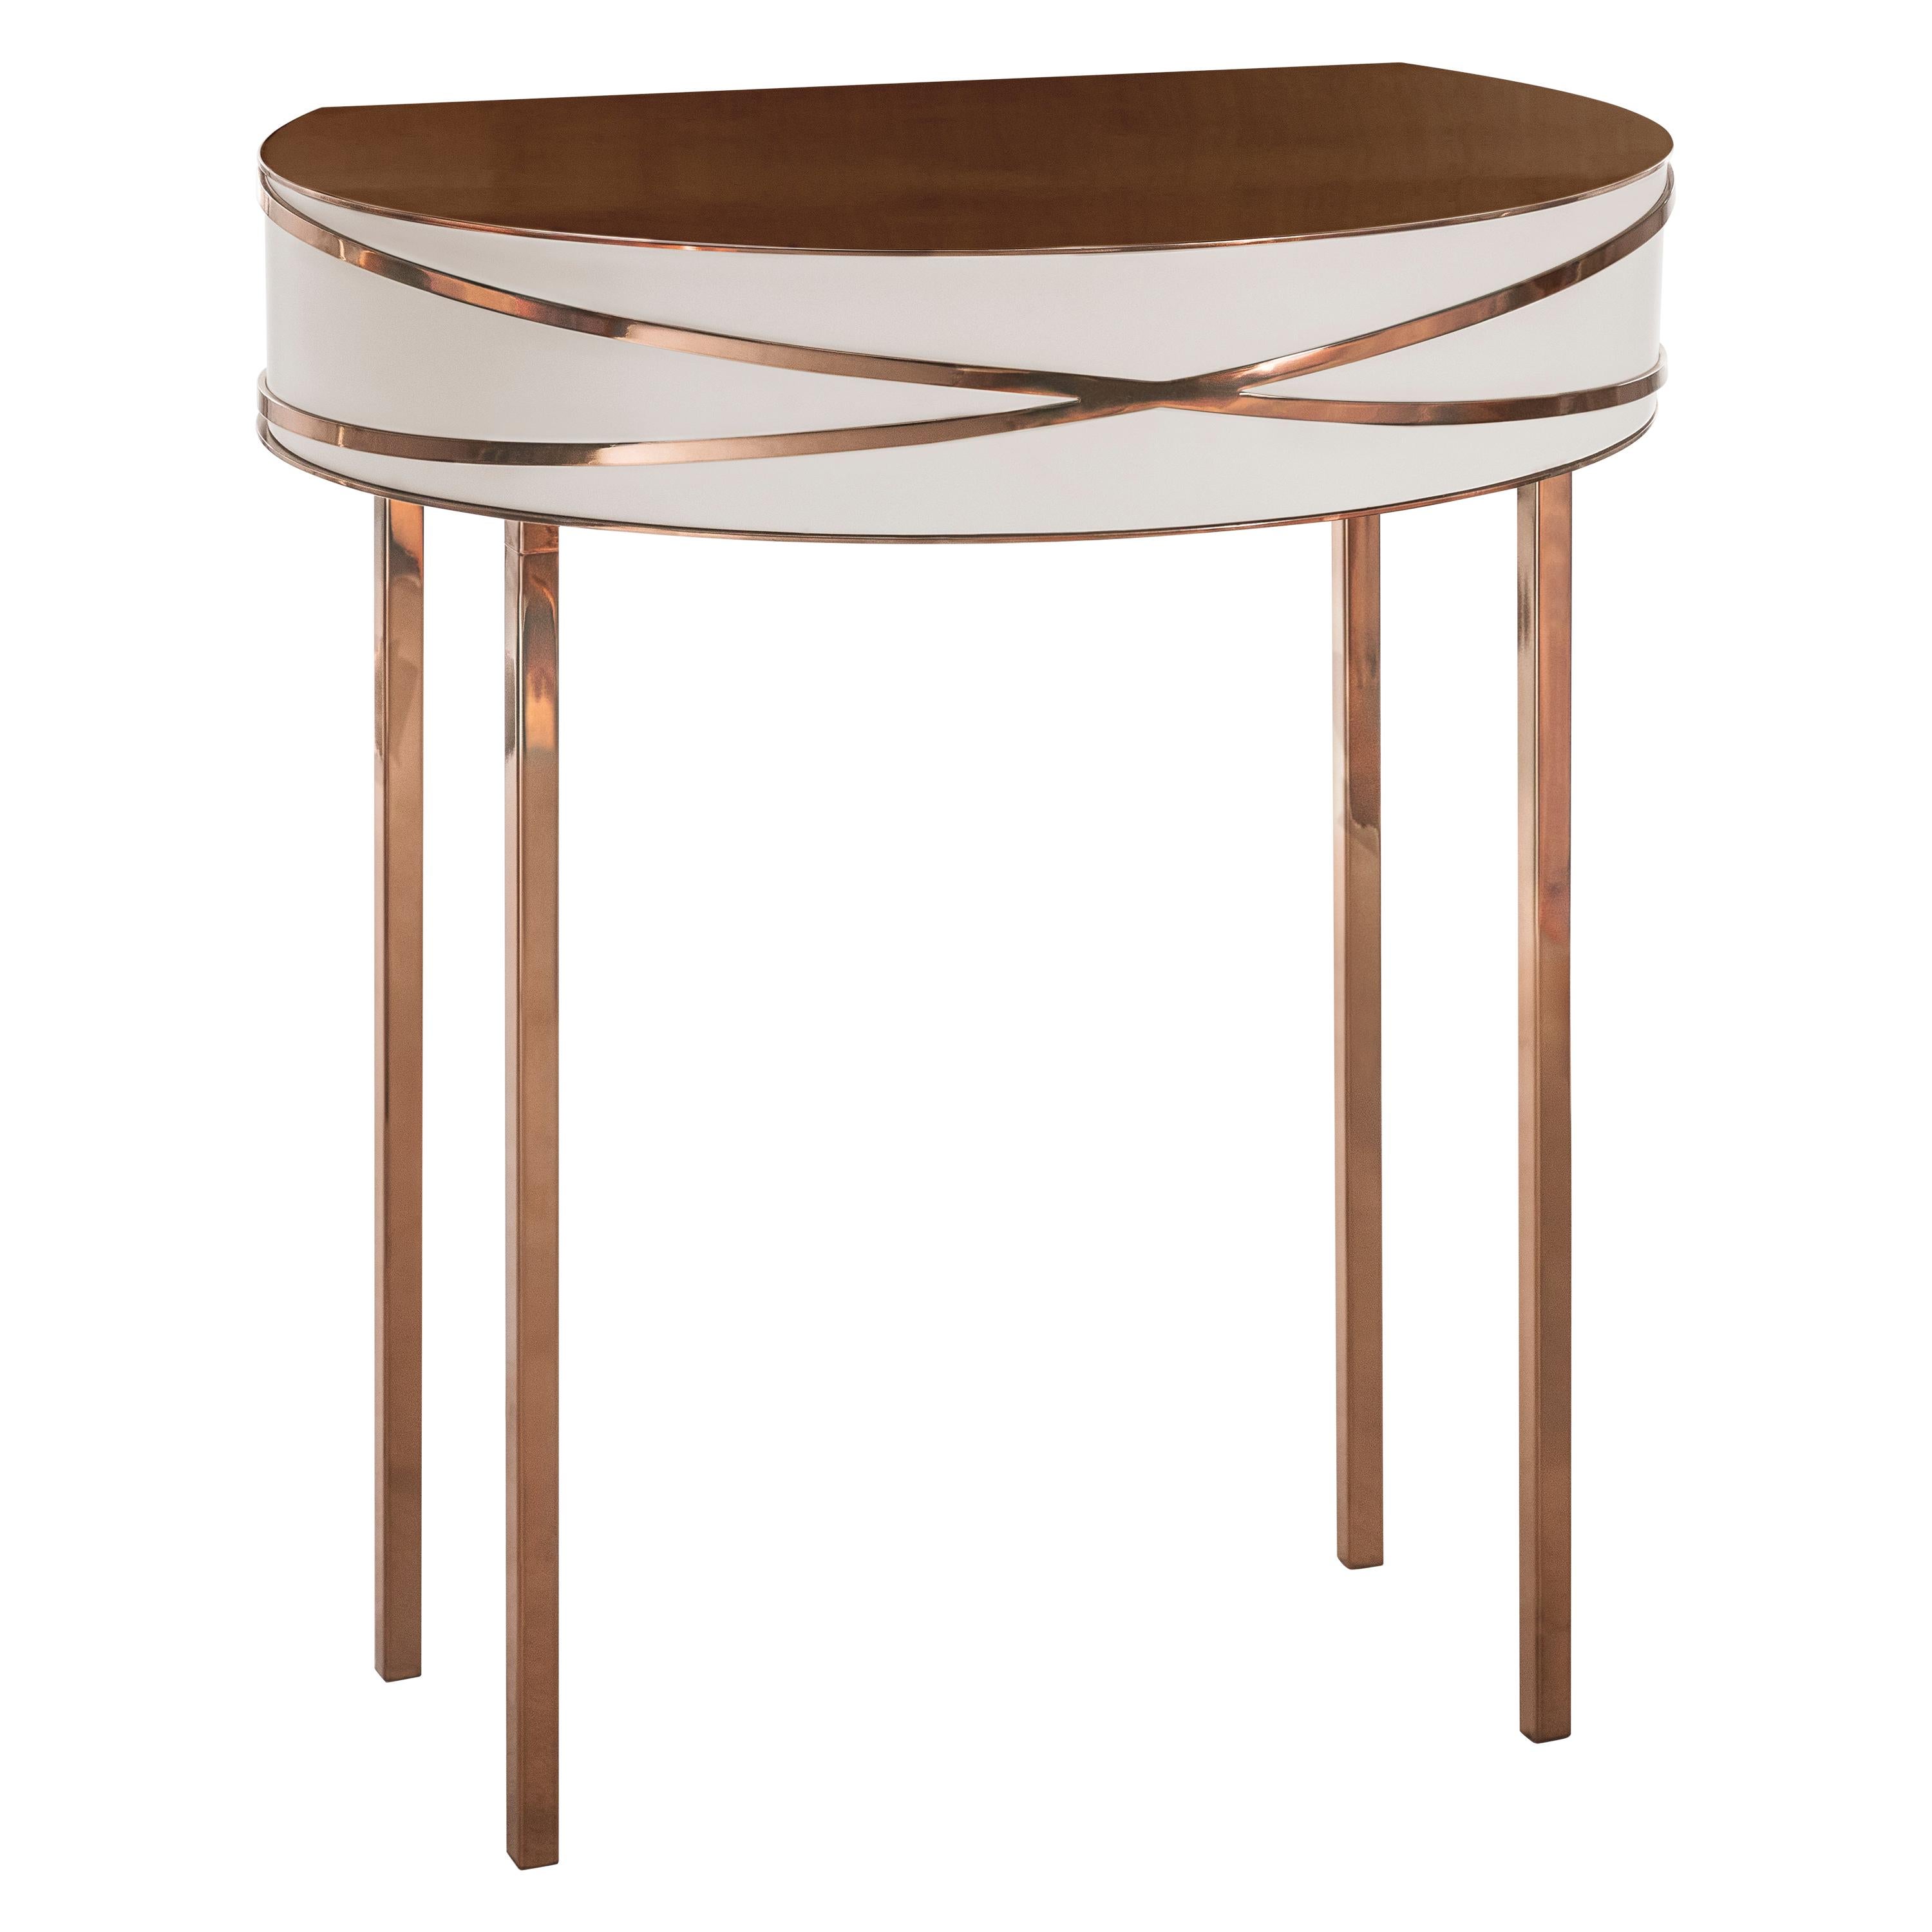 Stella Gray Console or Bedside Table with Rose Gold Trims by Nika Zupanc